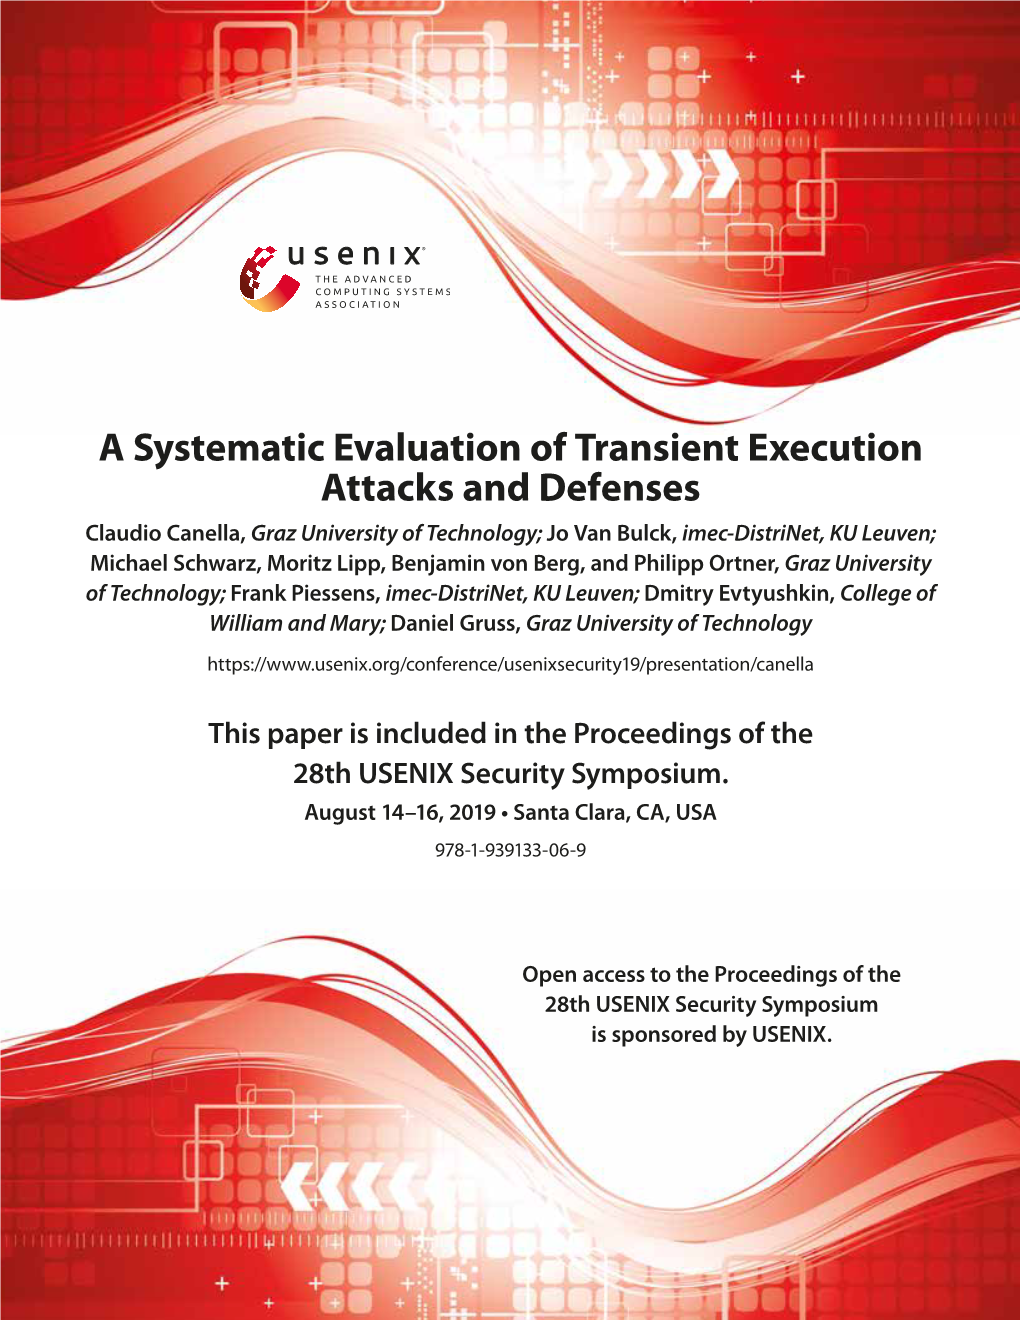 A Systematic Evaluation of Transient Execution Attacks and Defenses